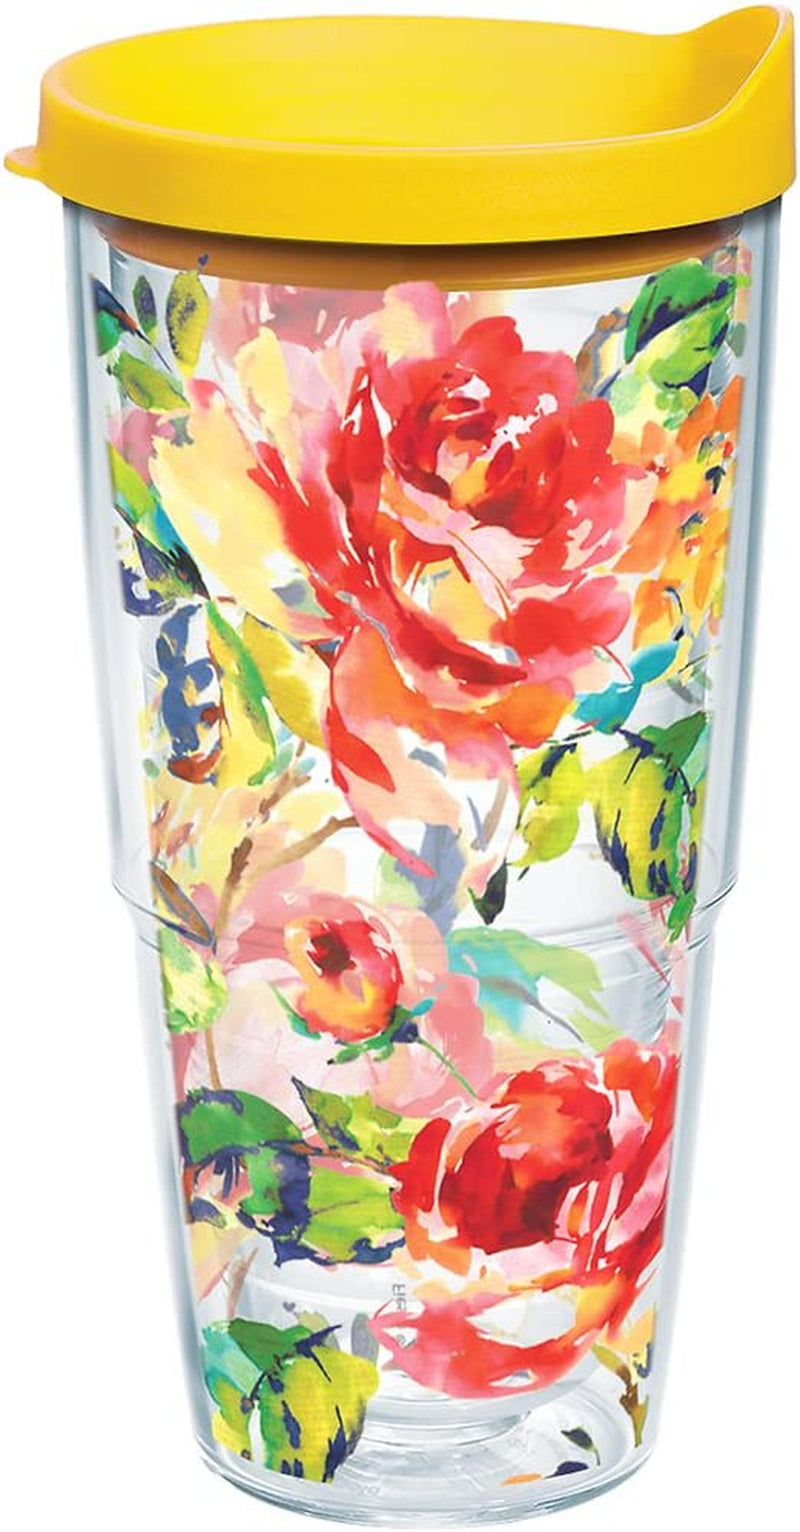 Tervis Triple Walled Fiesta Insulated Tumbler Cup Keeps Drinks Cold & Hot, 20Oz - Stainless Steel, Floral Bouquet